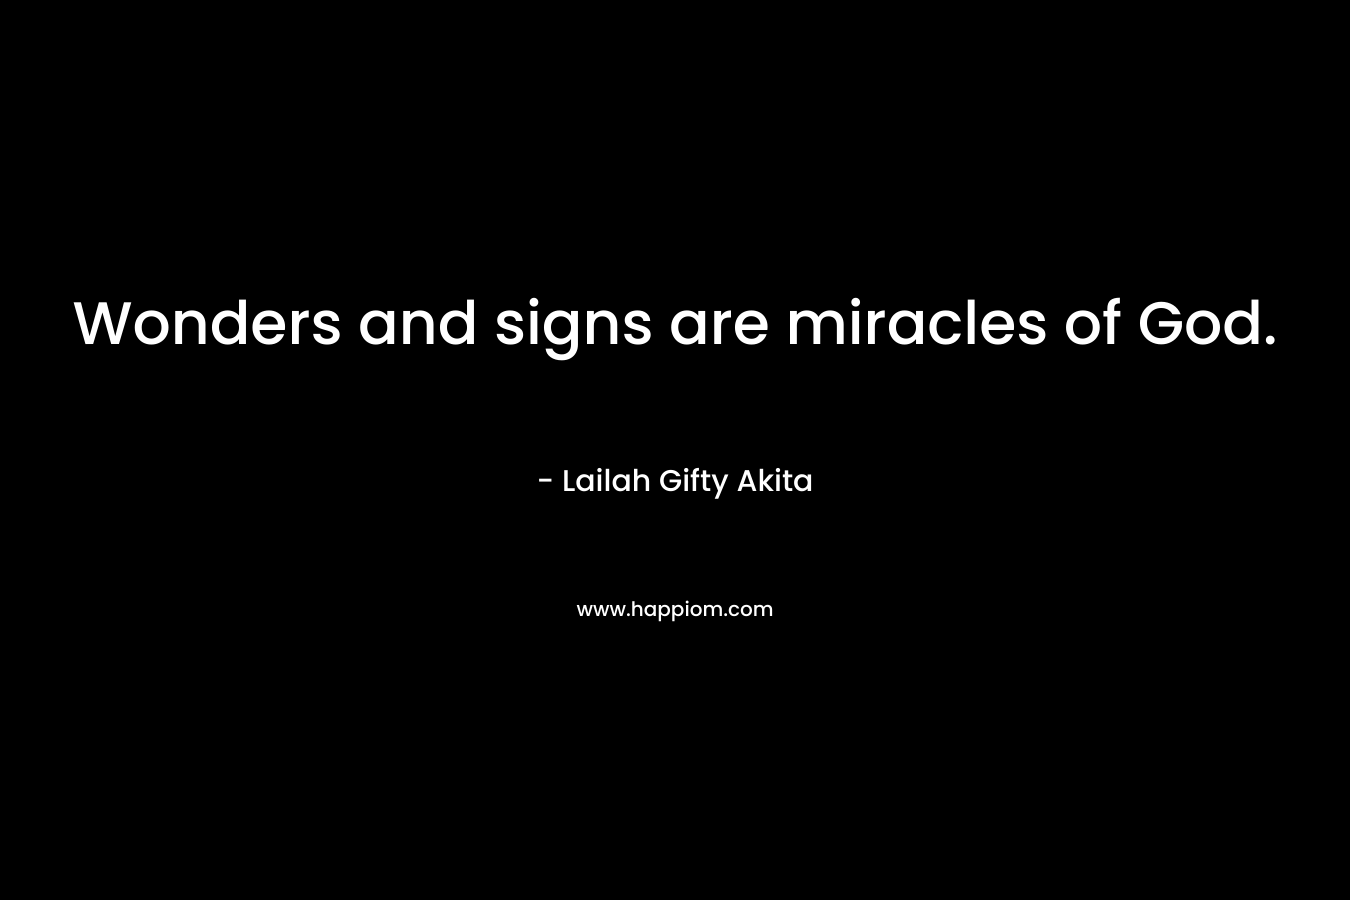 Wonders and signs are miracles of God.